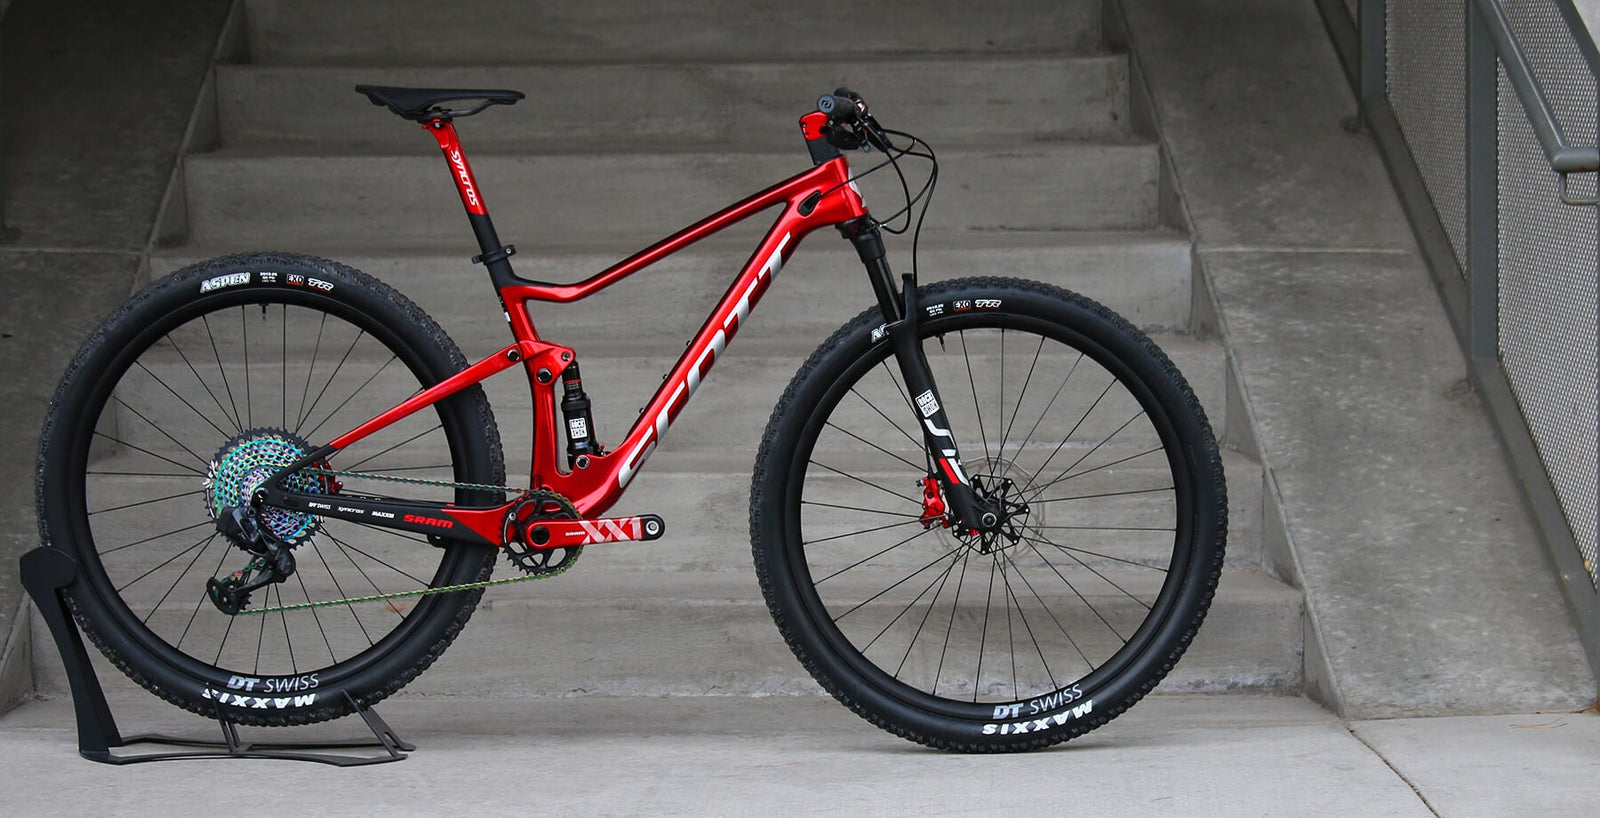 This SCOTT Spark RC 900 LTD is a Bike Nino Schurter Could Be Proud Of